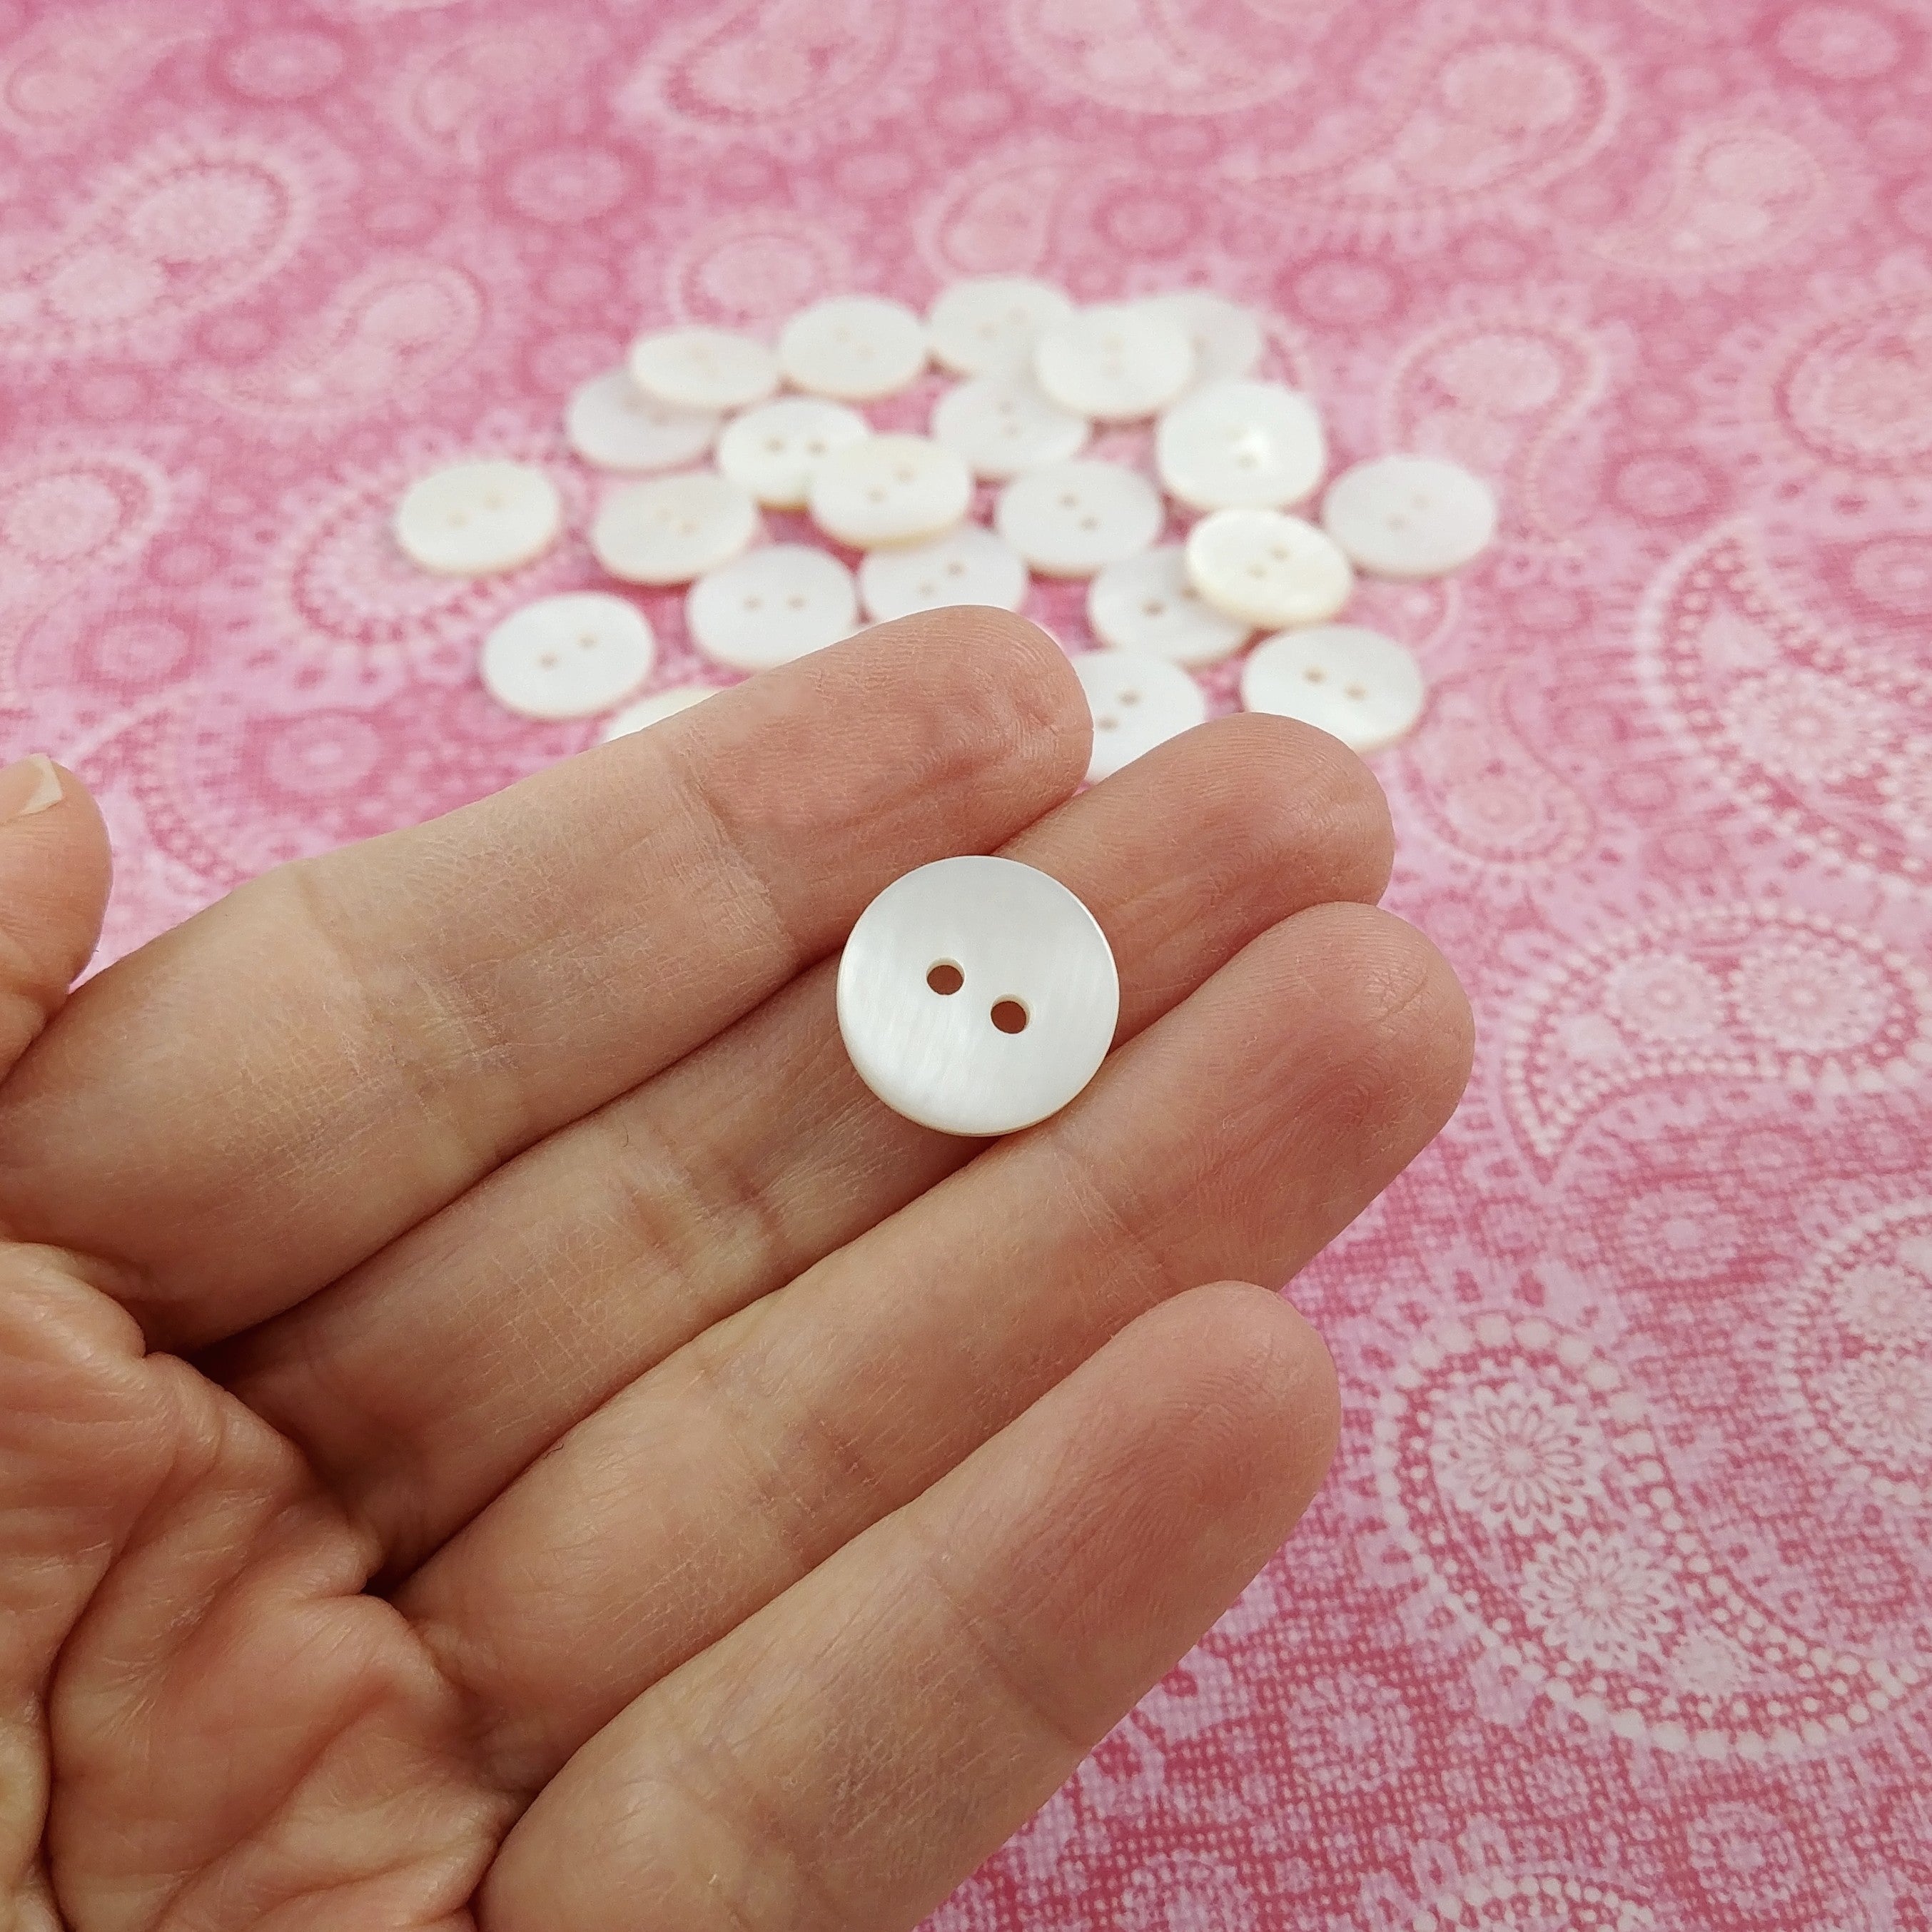 100pcs/lot real Natural shell buttons 10mm/15mm/20mm 2-hole flat mother of pearl  buttons